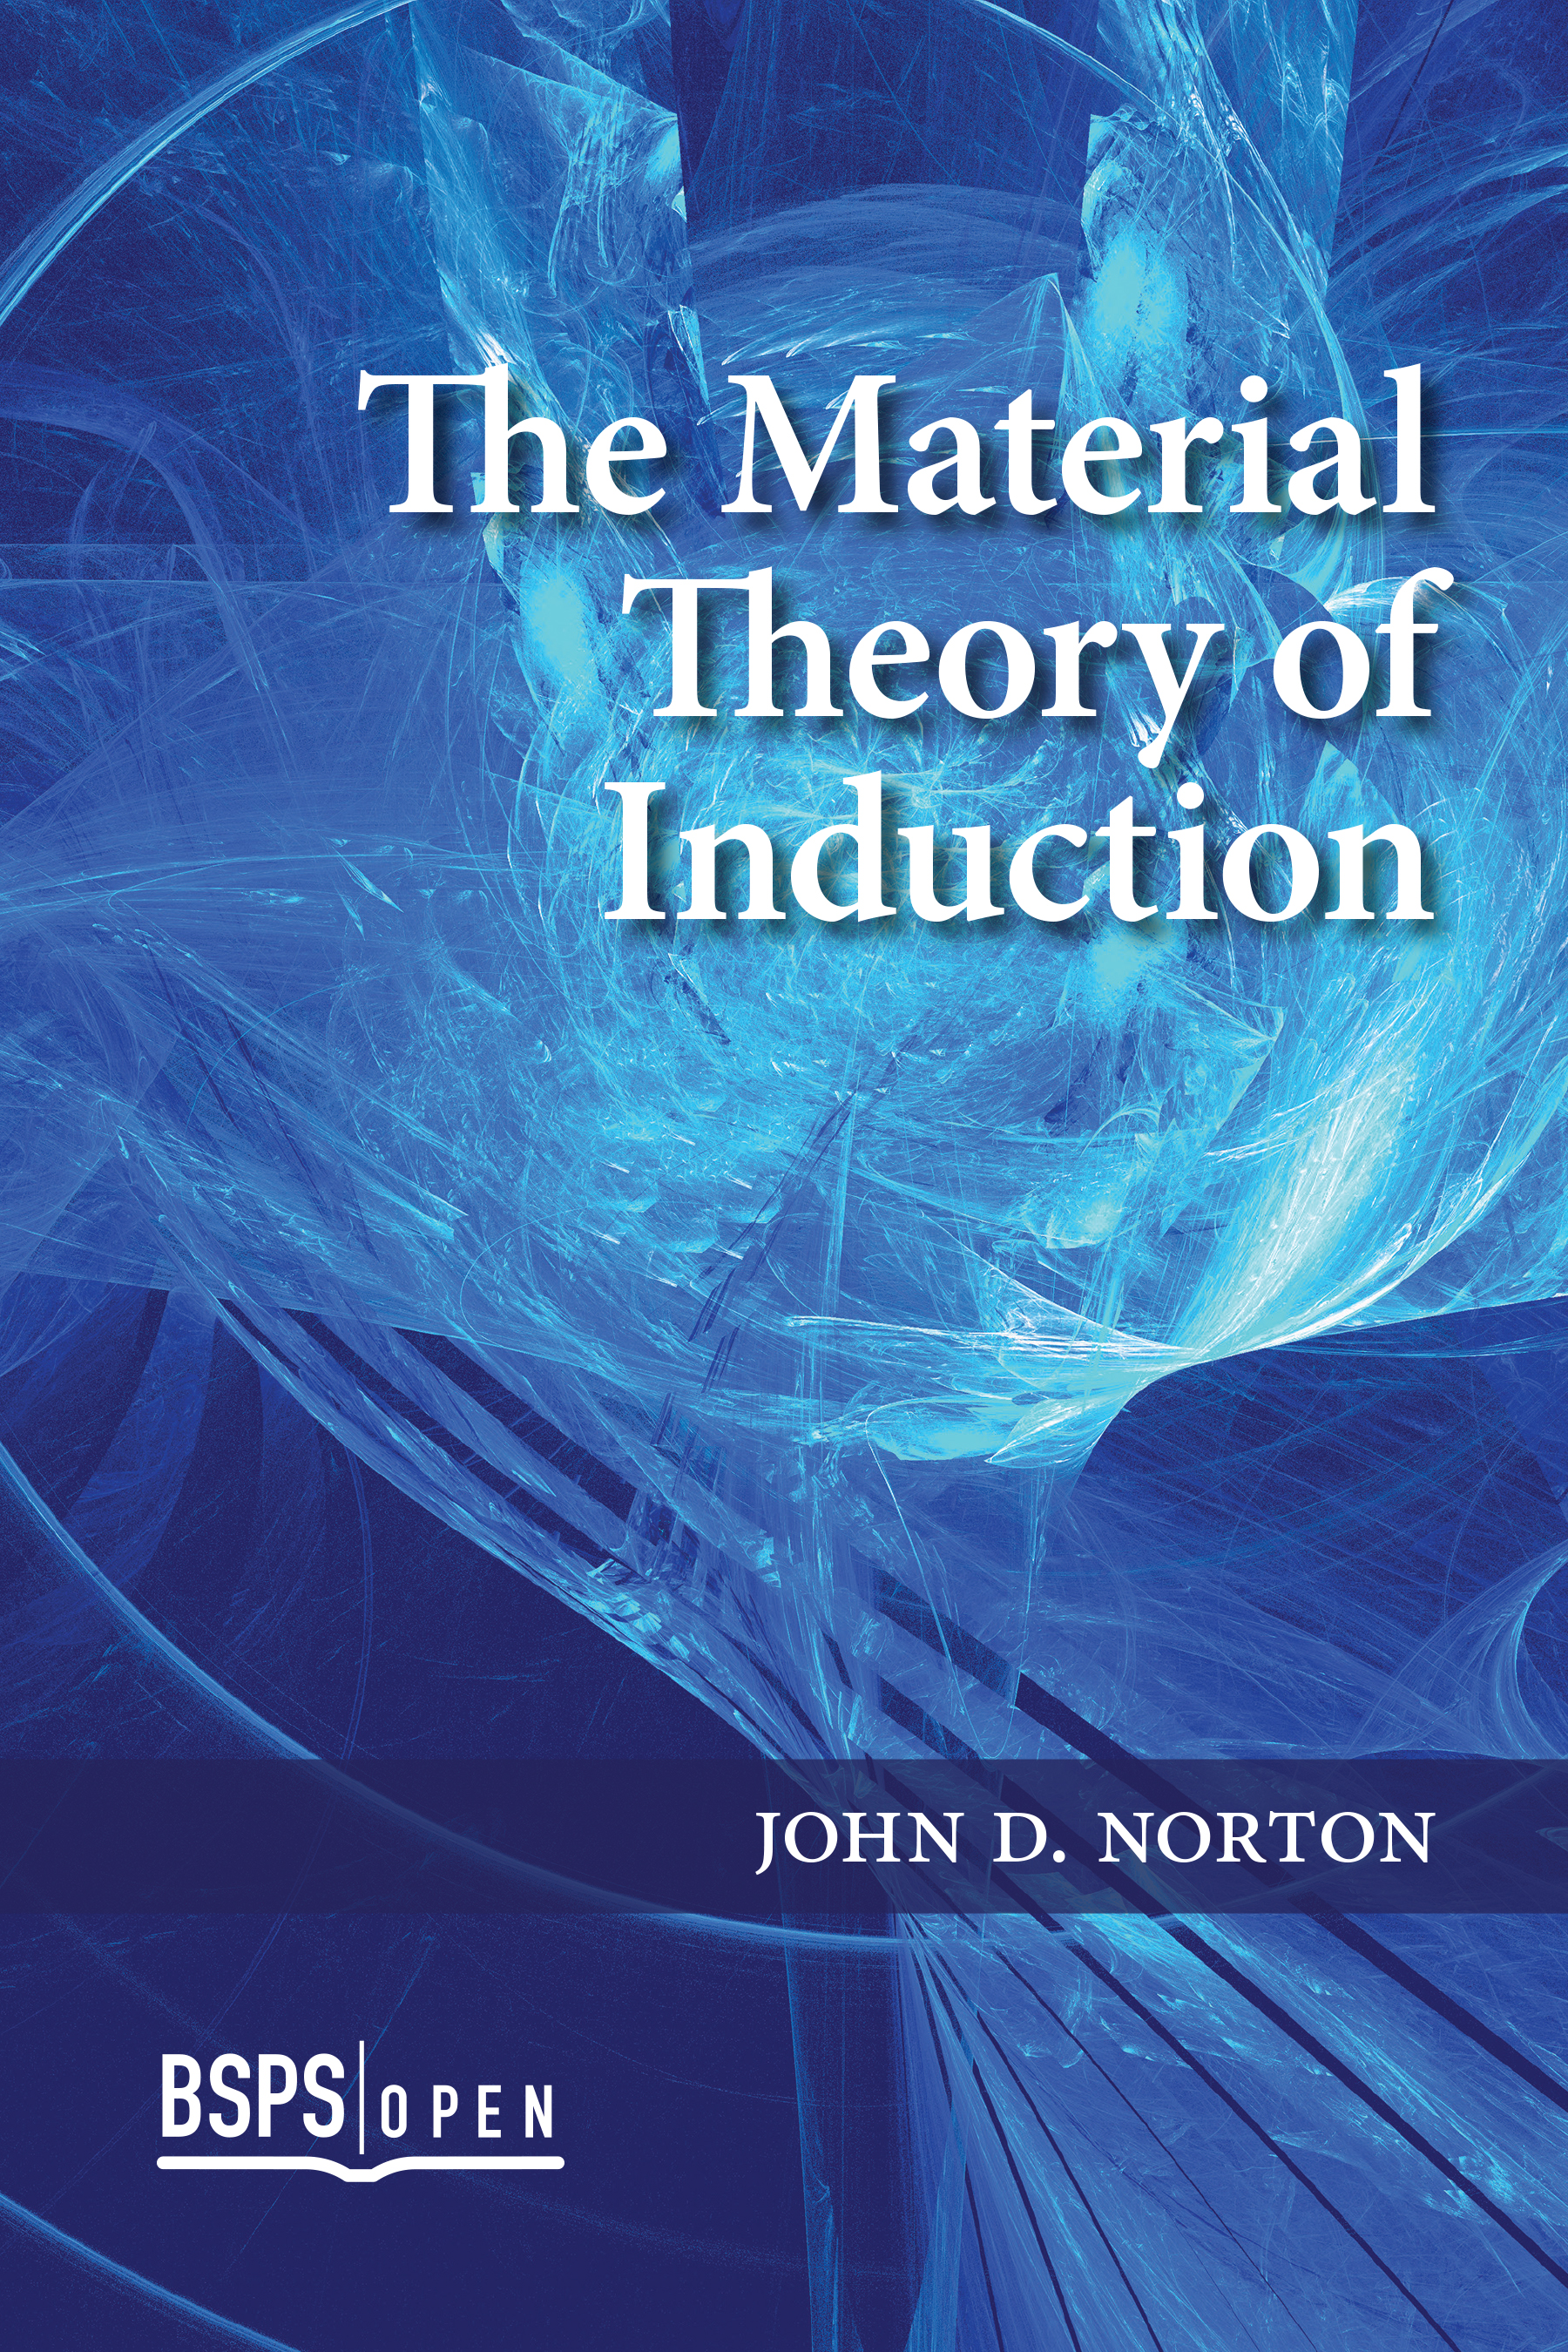 Book Cover Image for: Material Theory of Induction